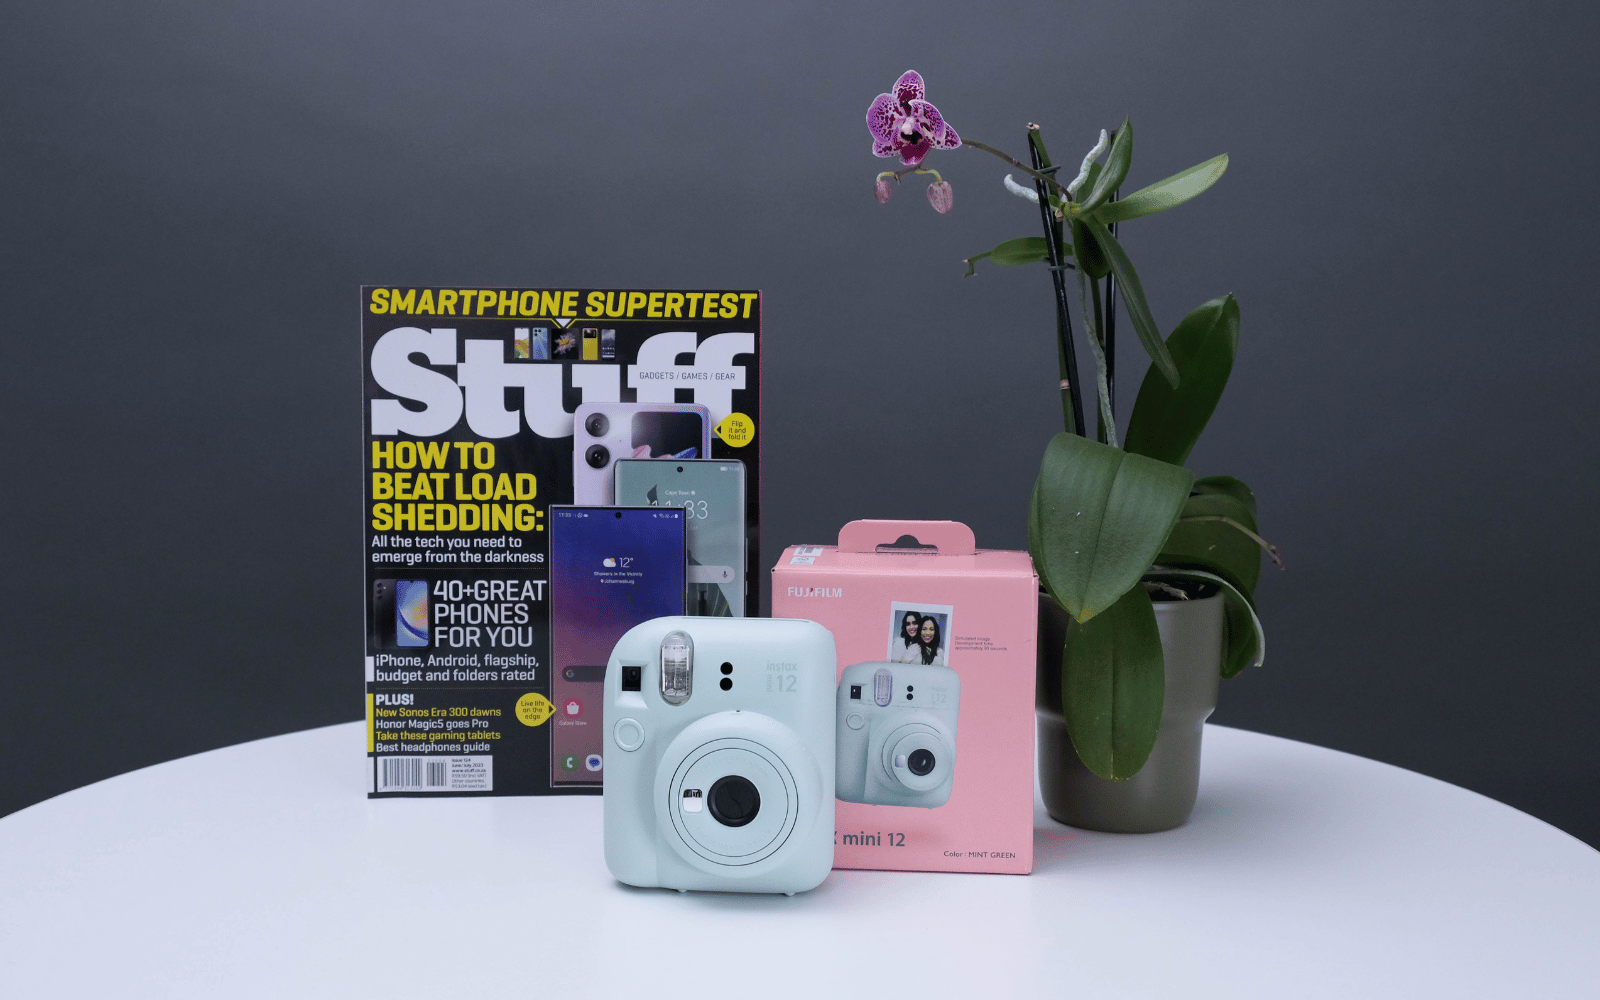 Fujifilm Instax Mini 12 review: A foolproof, compact instant